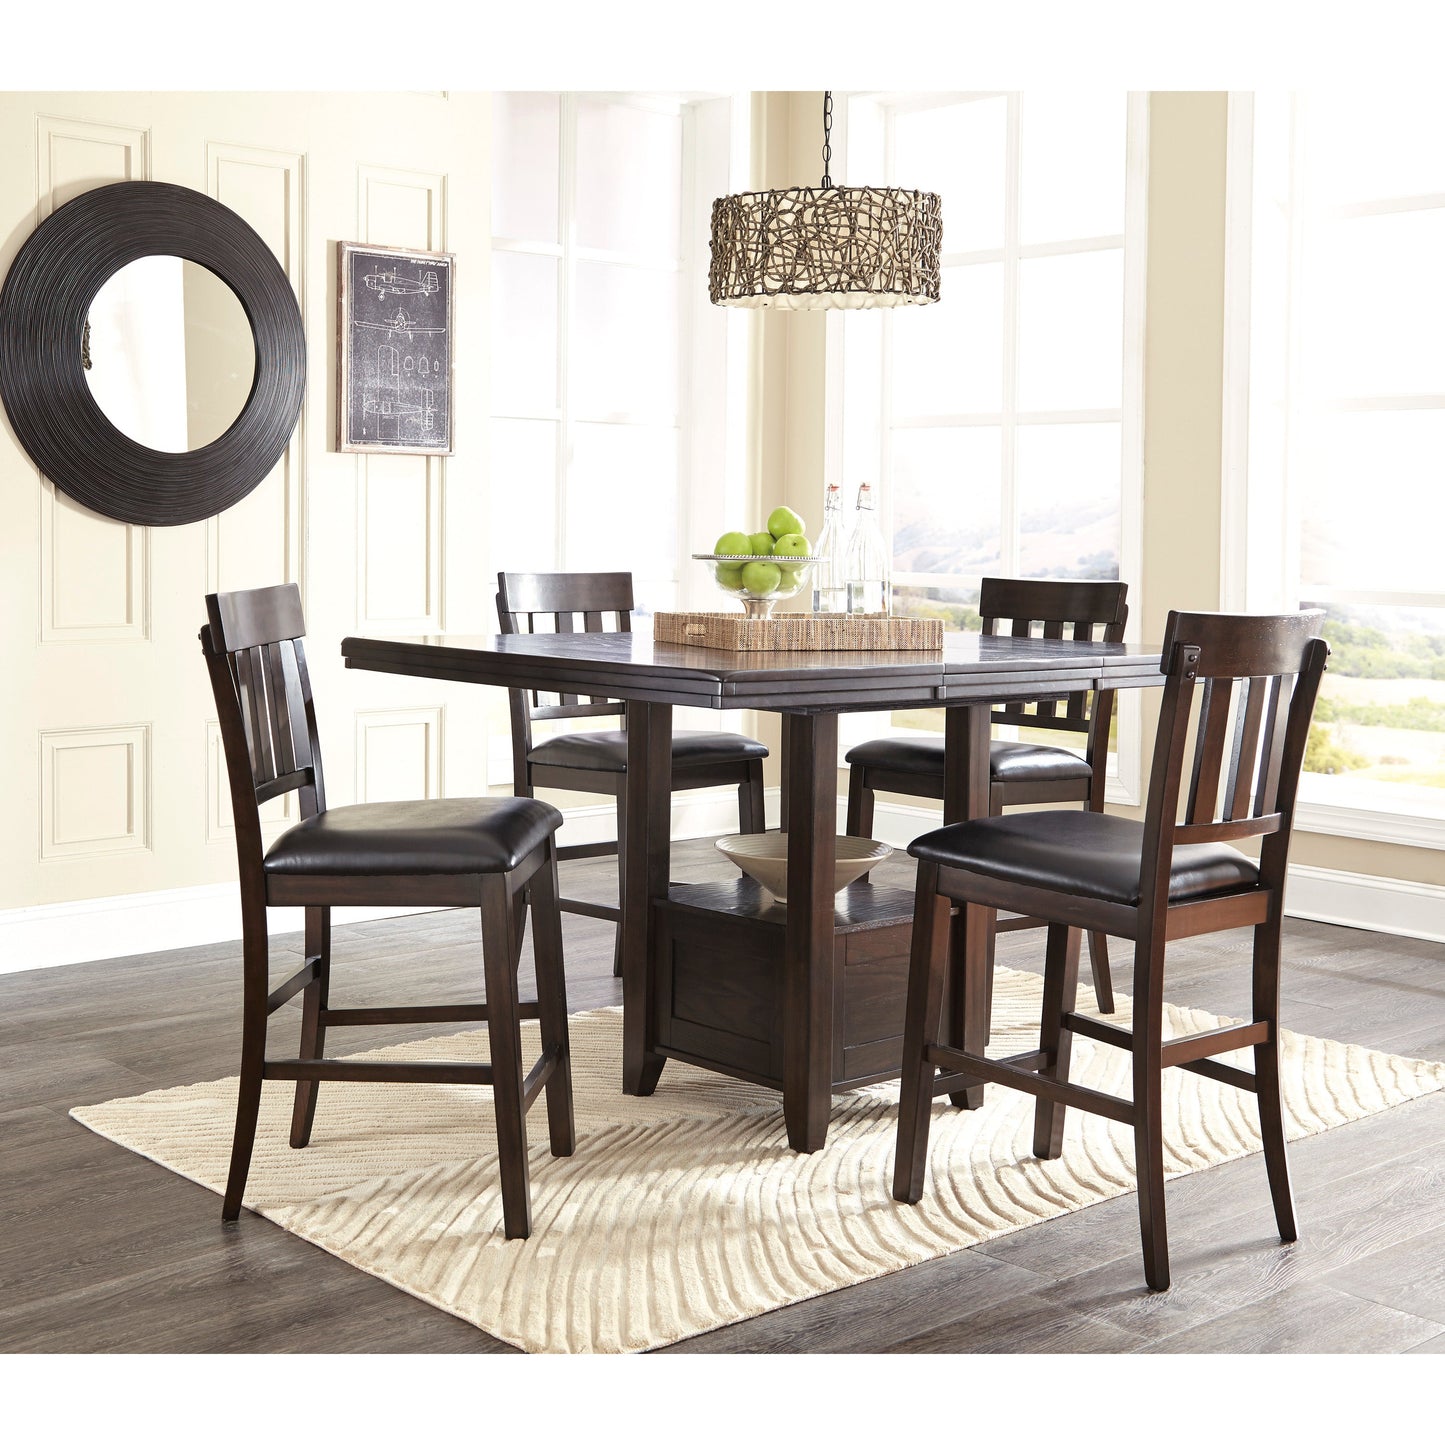 HADDIGAN DINING SET - TABLE & 4 CHAIRS - COUNTER HEIGHT